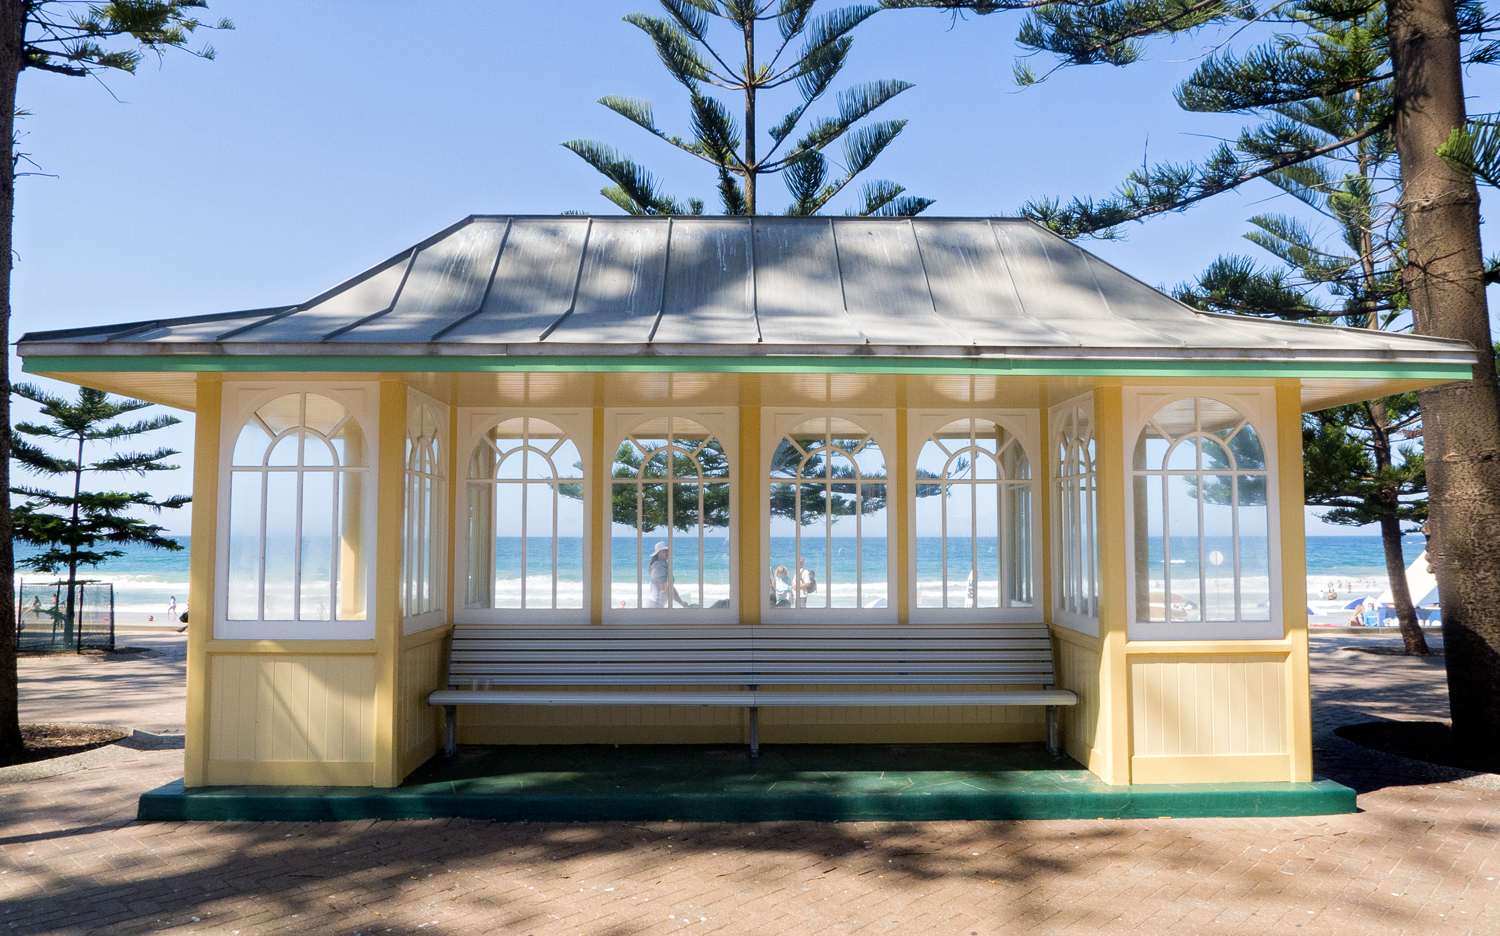 Tram stop at Manly Beach